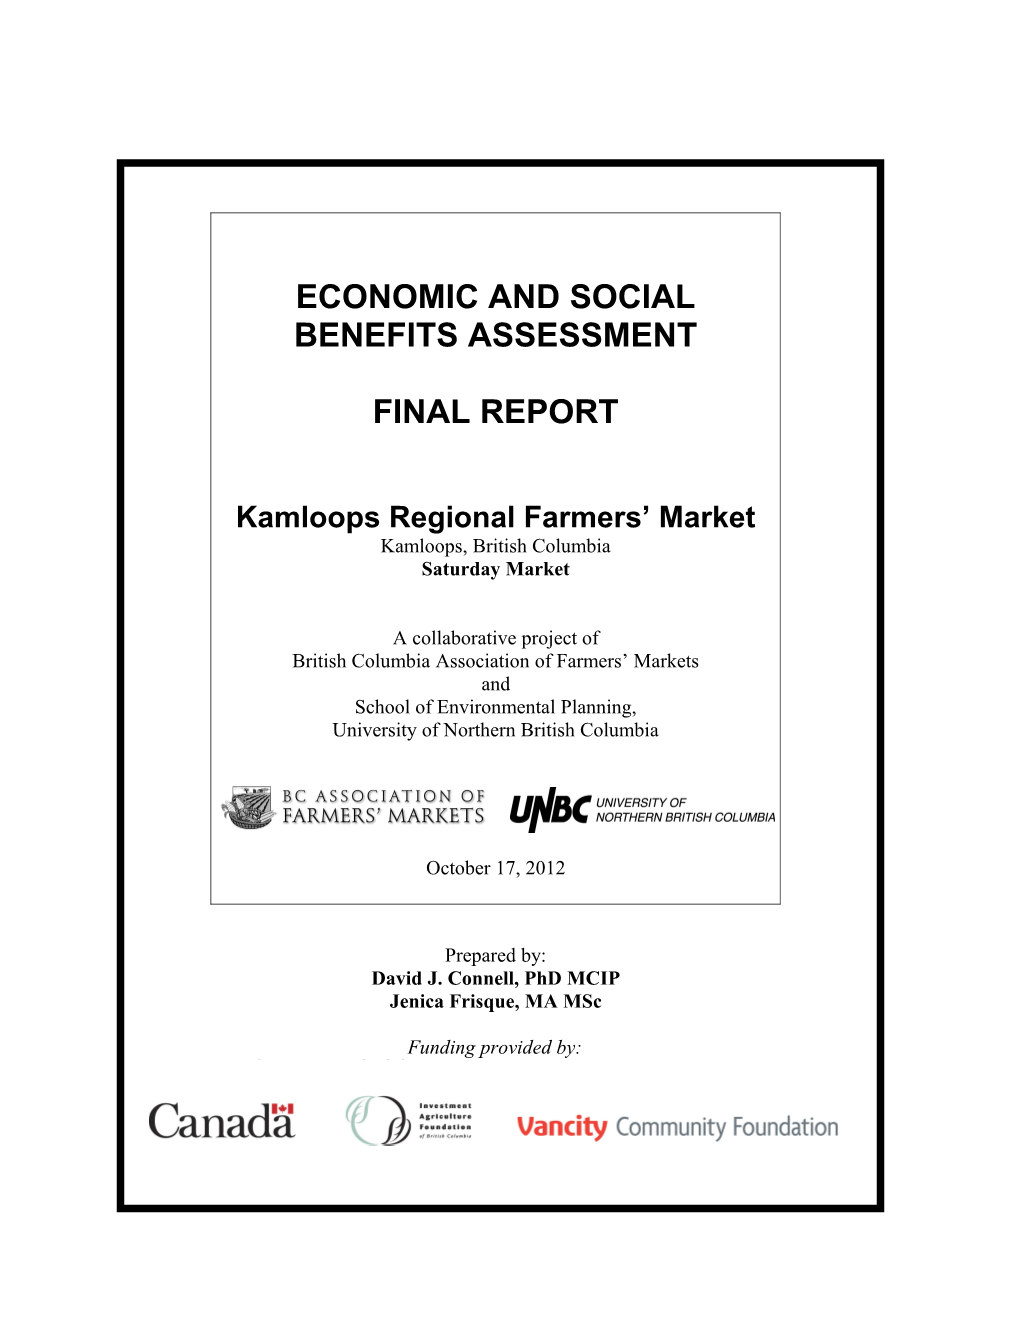 Economic and Social Benefits Assessment